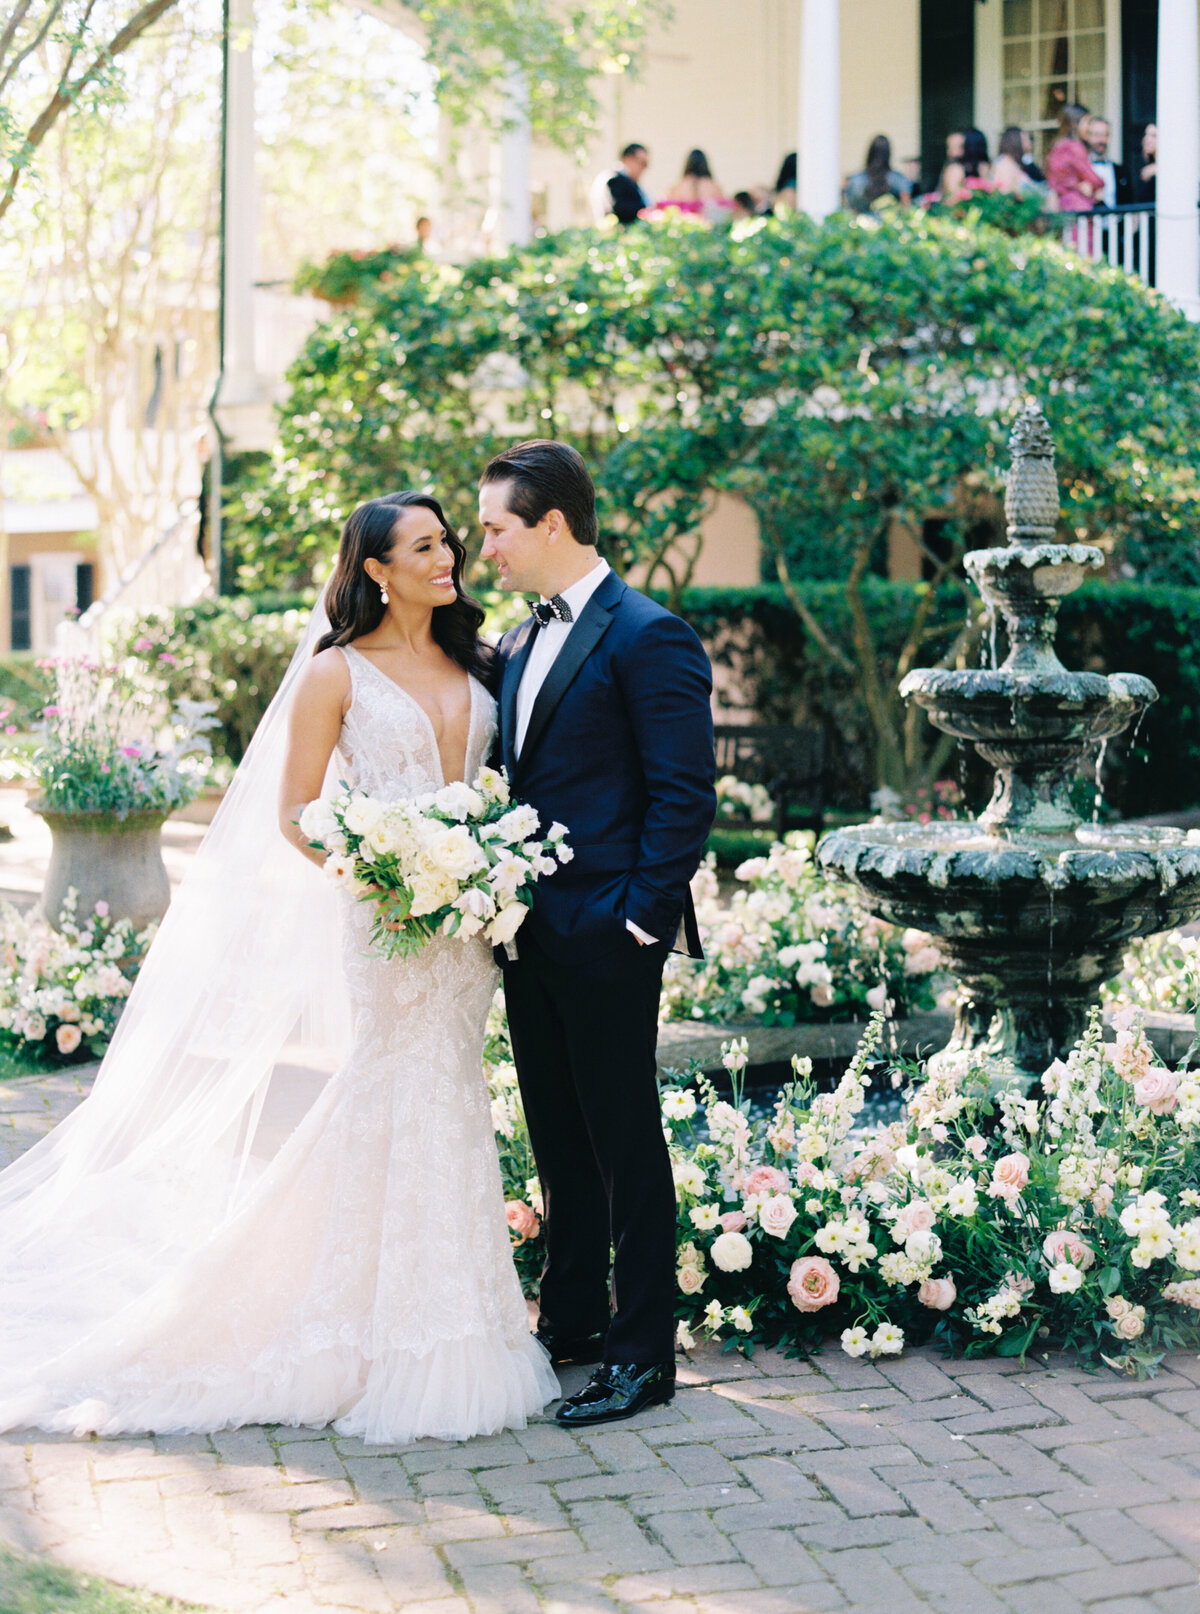 Dark haired bride and groom portrait in front of flower lined fountain at Thomas Bennett House spring wedding.